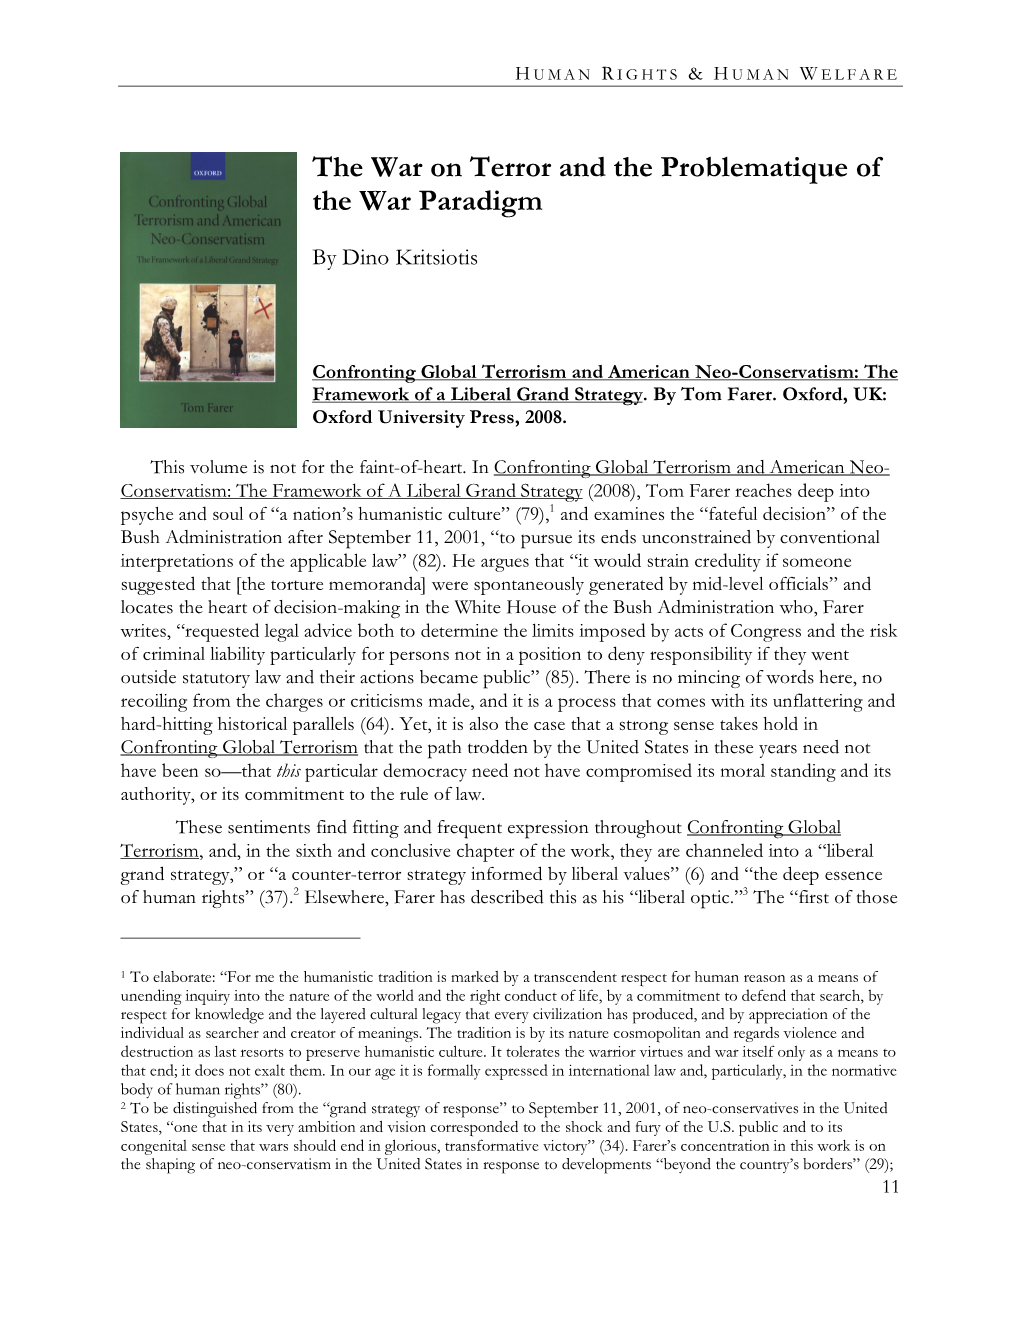 The War on Terror and the Problematique of the War Paradigm